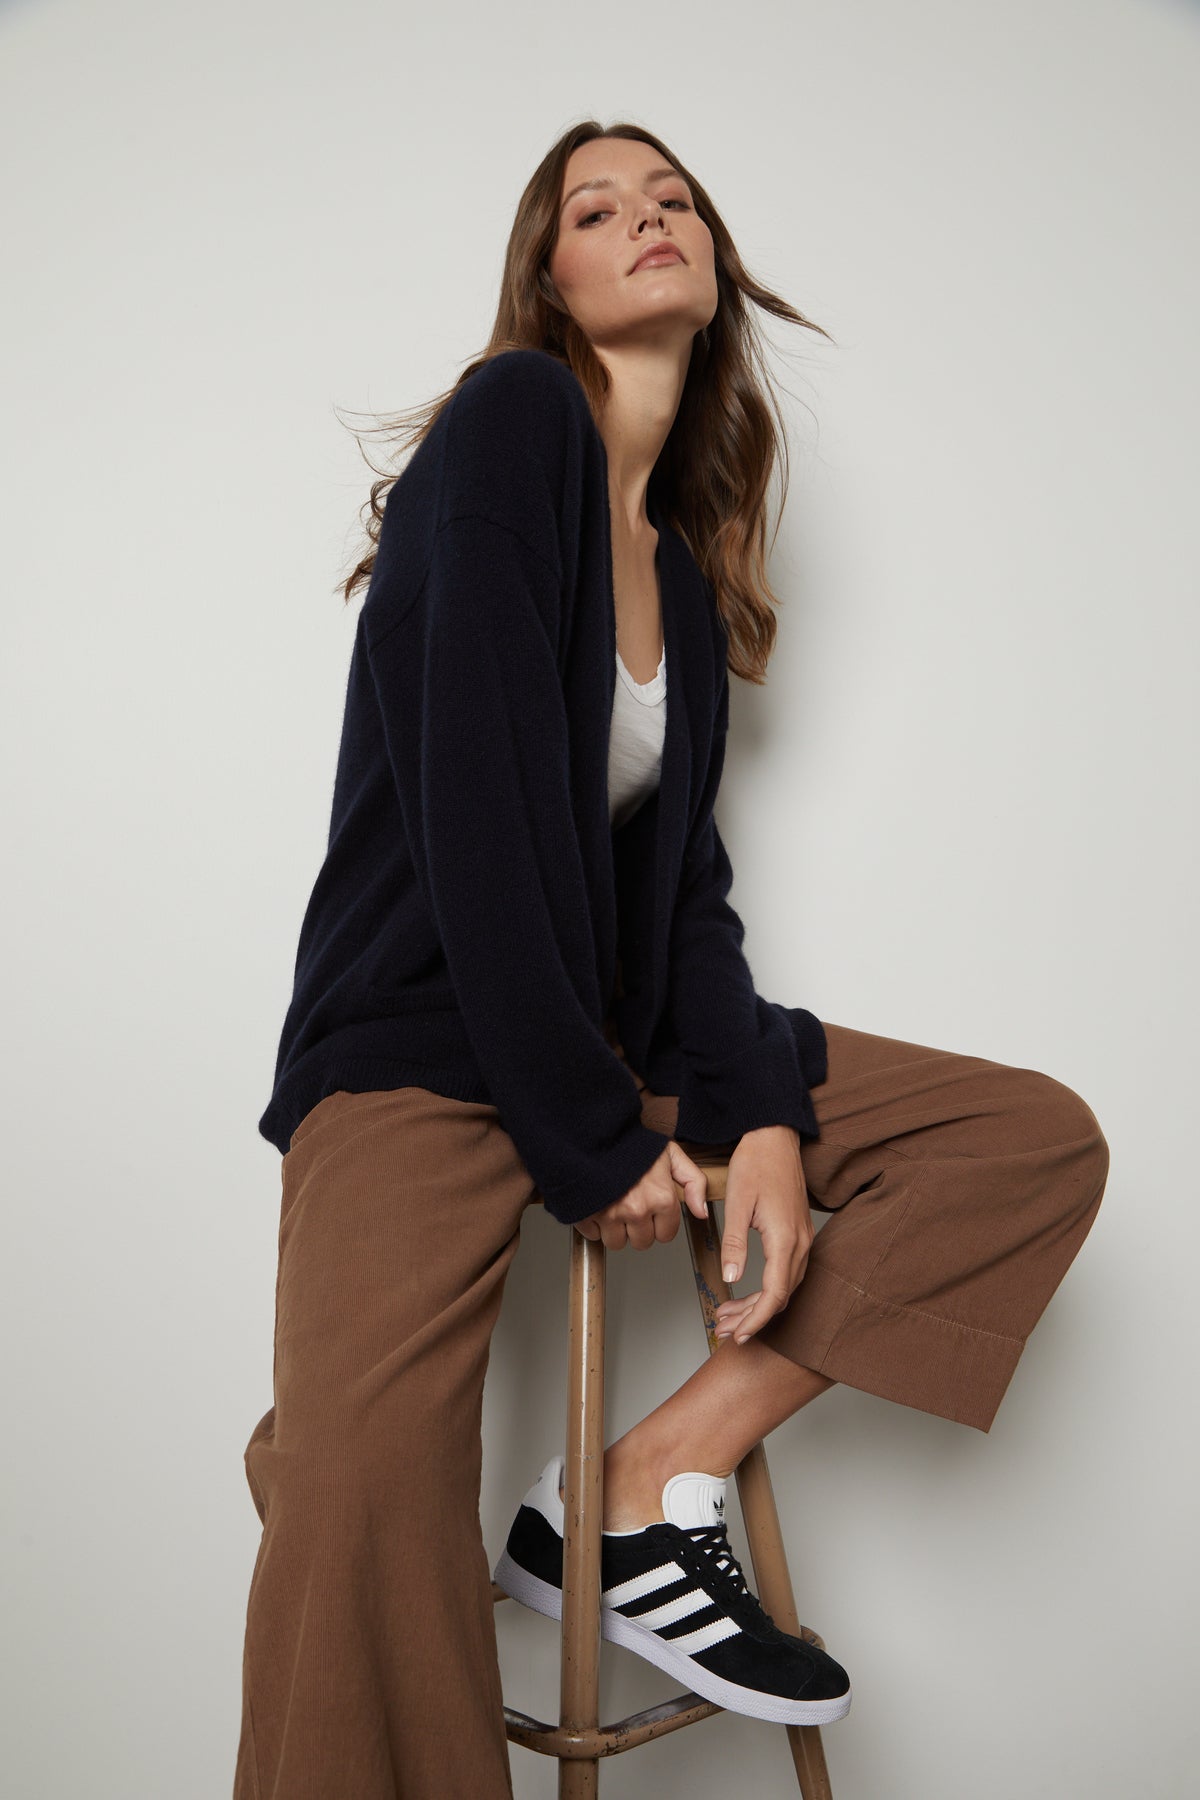 A woman is sitting on a stool wearing the Velvet by Graham & Spencer LILA CASHMERE CARDIGAN and pants.-26910354211009